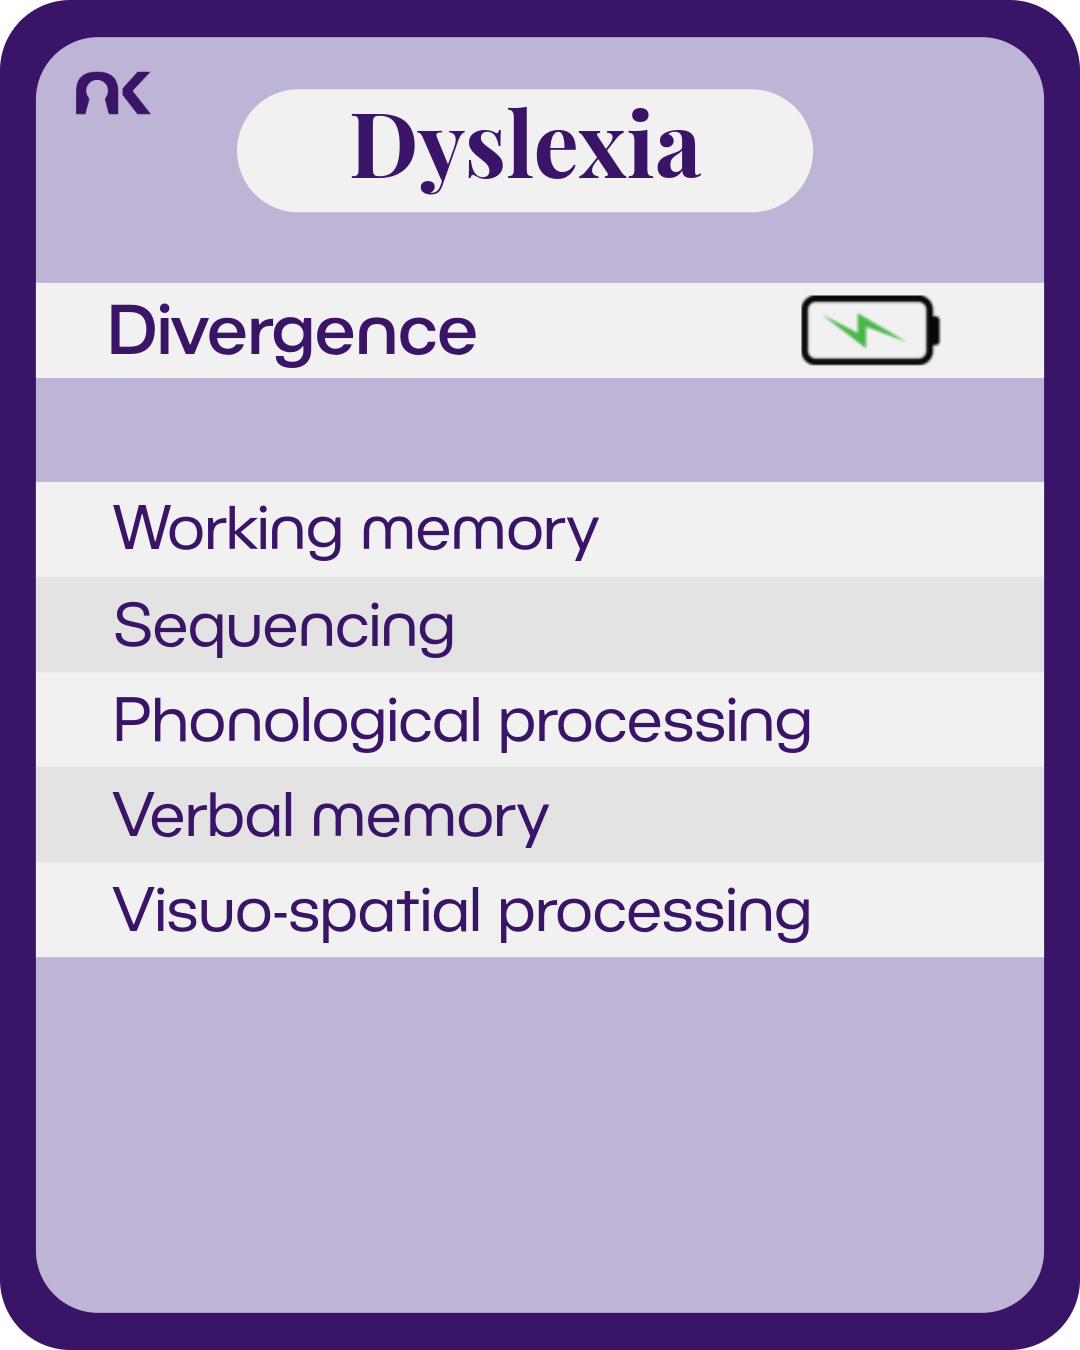 An information card made to look like it is from a card game. Next to the subtitle "divergence" is a battery with an electric bolt inside it. Text says: "Dyslexia. Divergence. Working memory; Sequencing; Phonological processing; Verbal memory; Visuo-spatial processing."